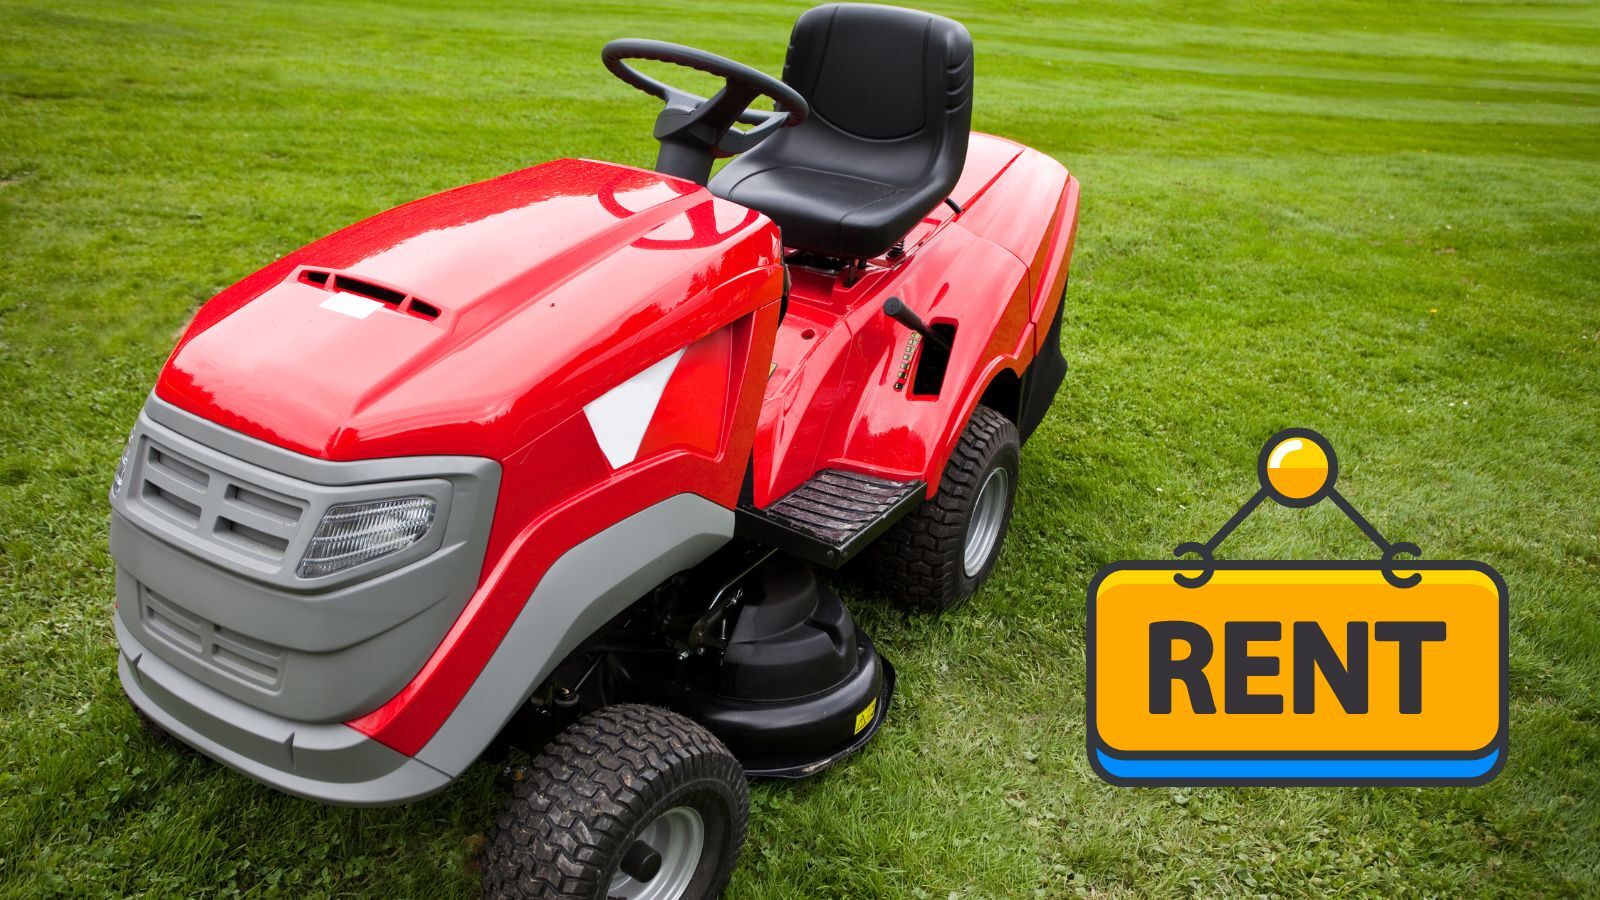 Can You Rent a Riding Lawn Mower? (All You Need to Know)